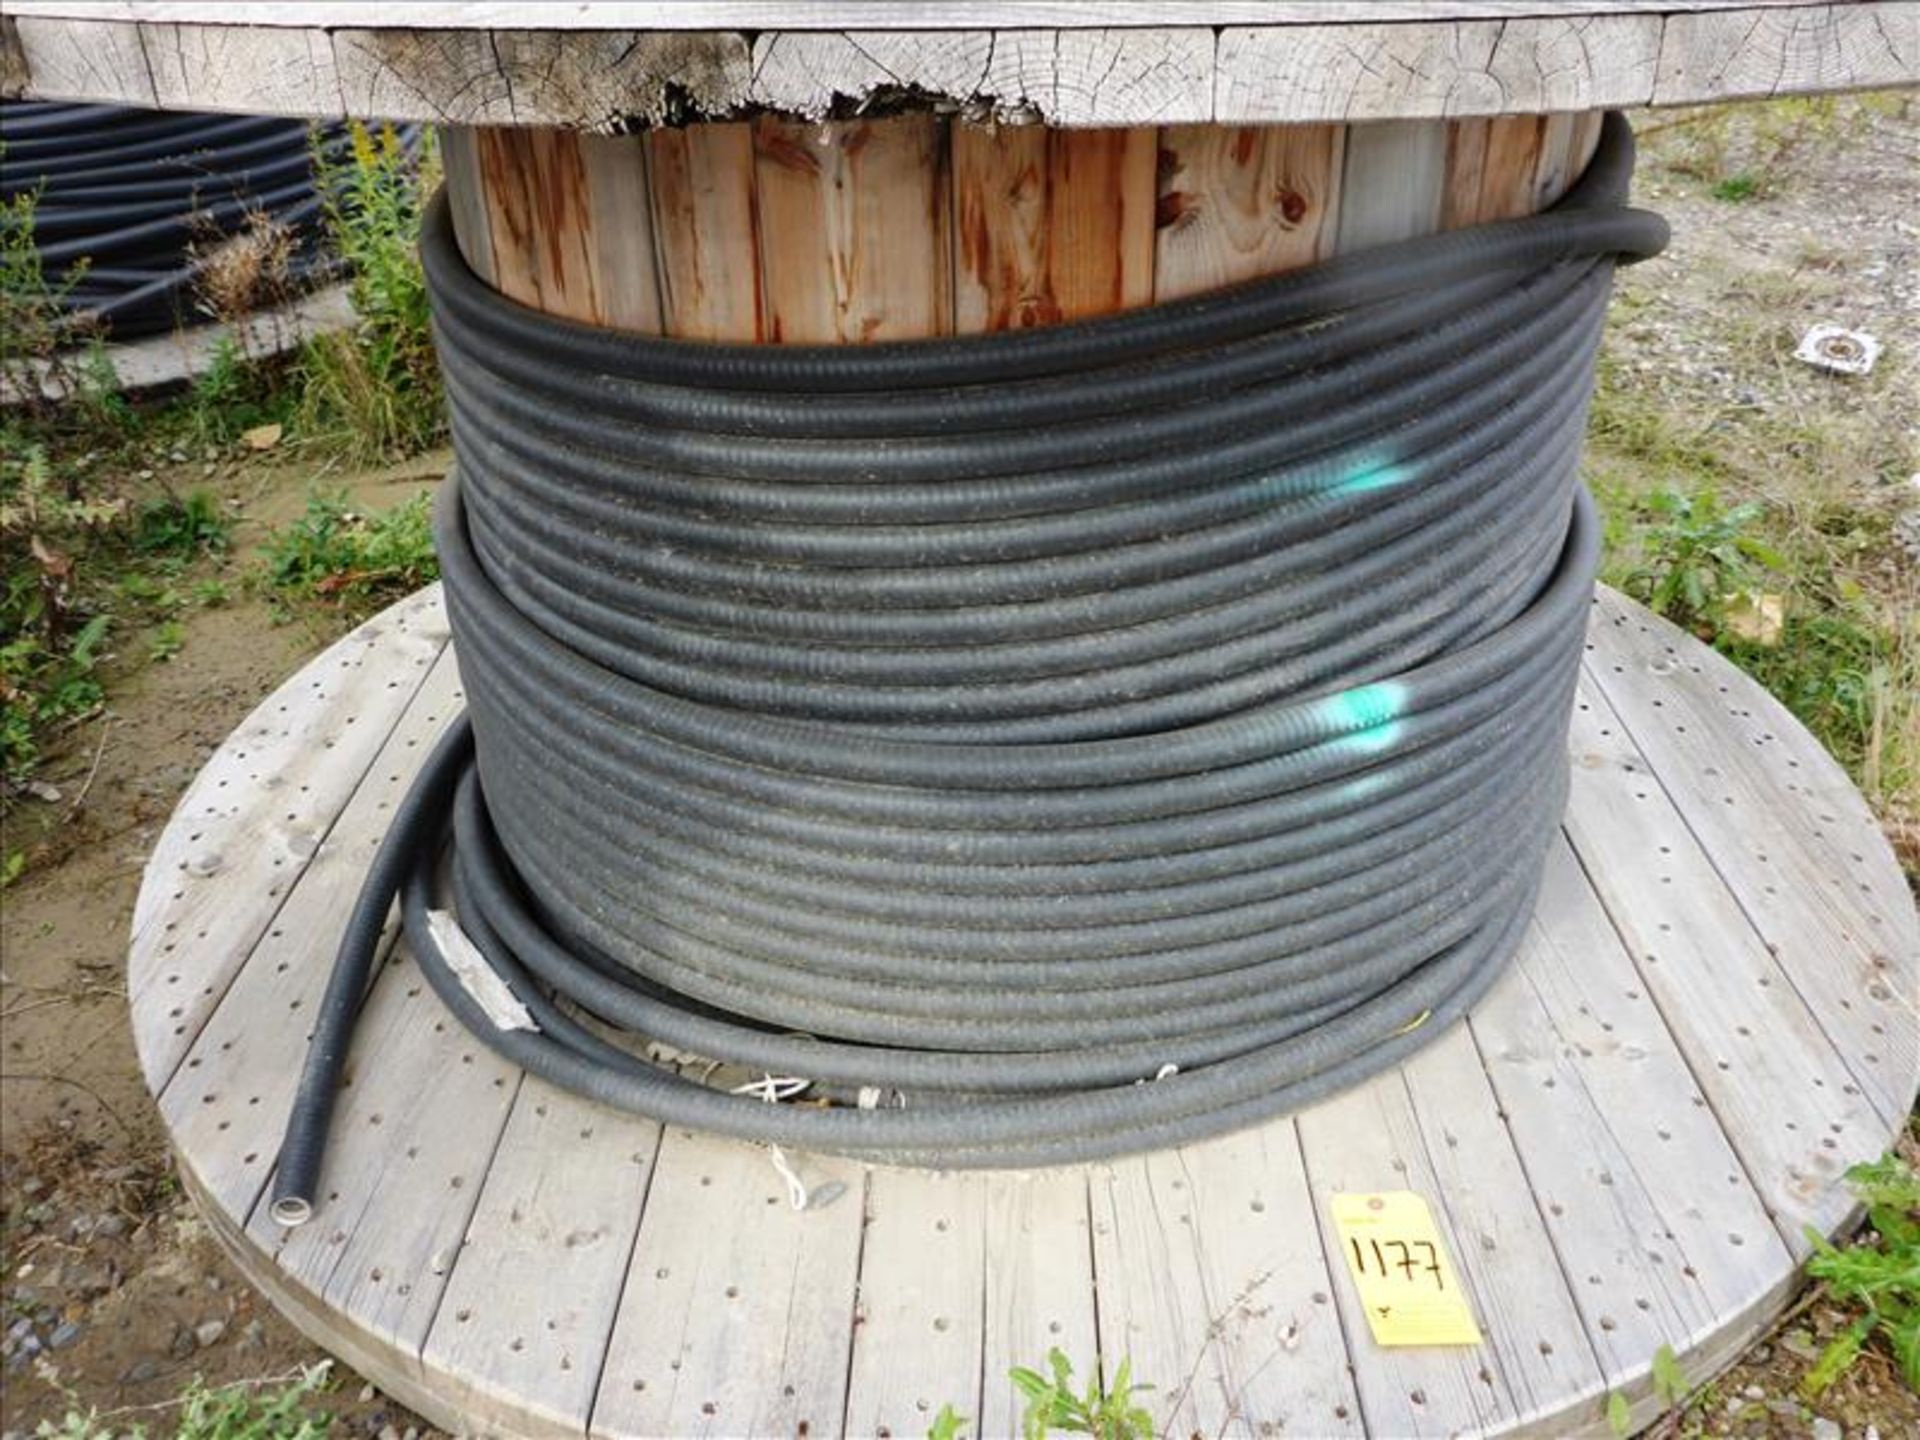 reel of electrical cable, approx. 230 ft., 01671 M -I- June 2013 Nexans Firex -II 14 AWG/30C Teck 90